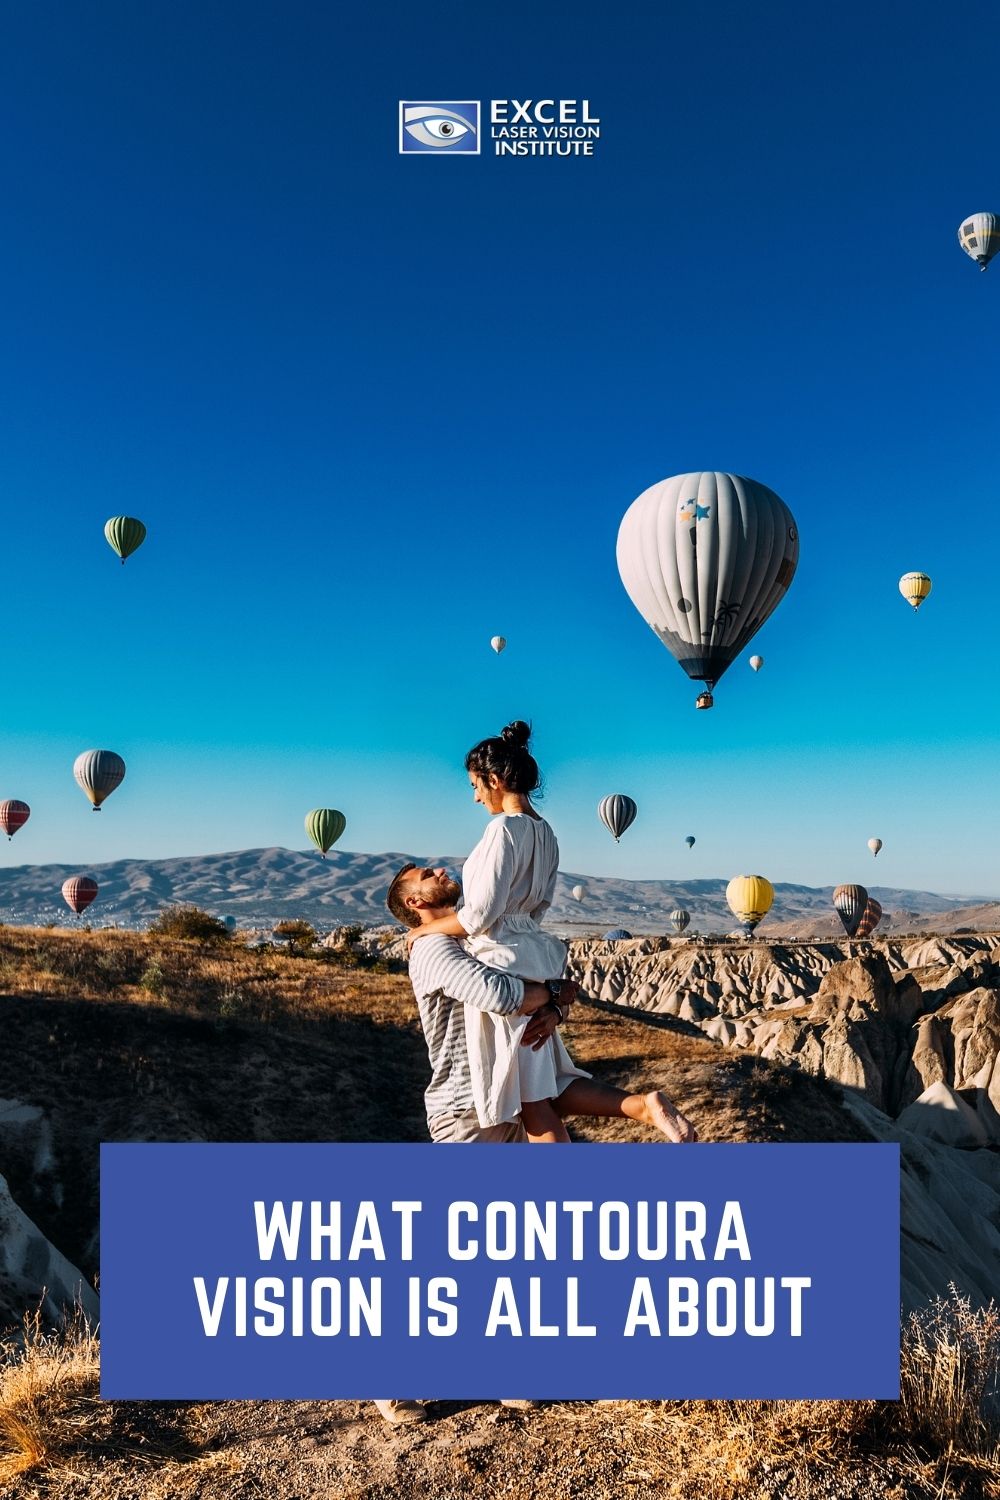 LASIK Eye Doctors in Orange County highly recommend Contoura Vision to all their patients